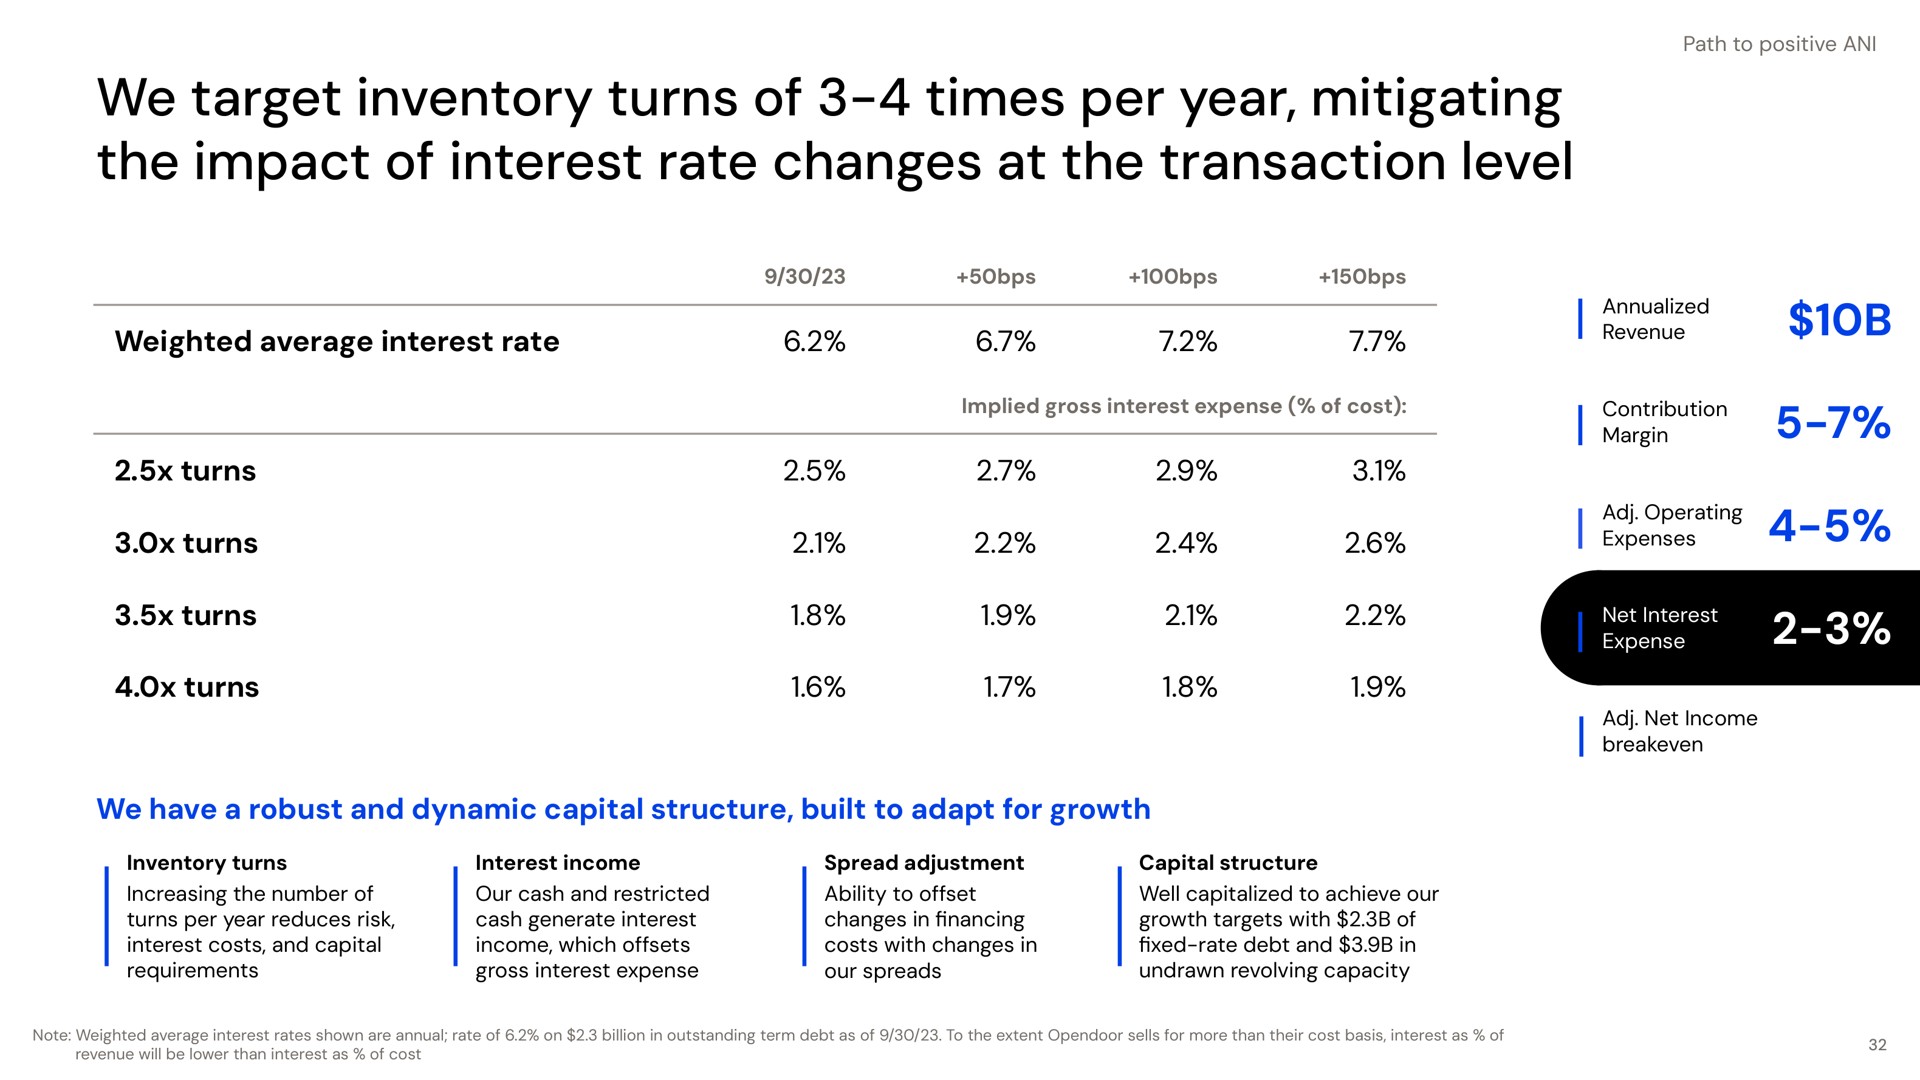 we target inventory turns of times per year mitigating the impact of interest rate changes at the transaction level weighted average interest rate turns turns turns turns we have a robust and dynamic capital structure built to adapt for growth | Opendoor